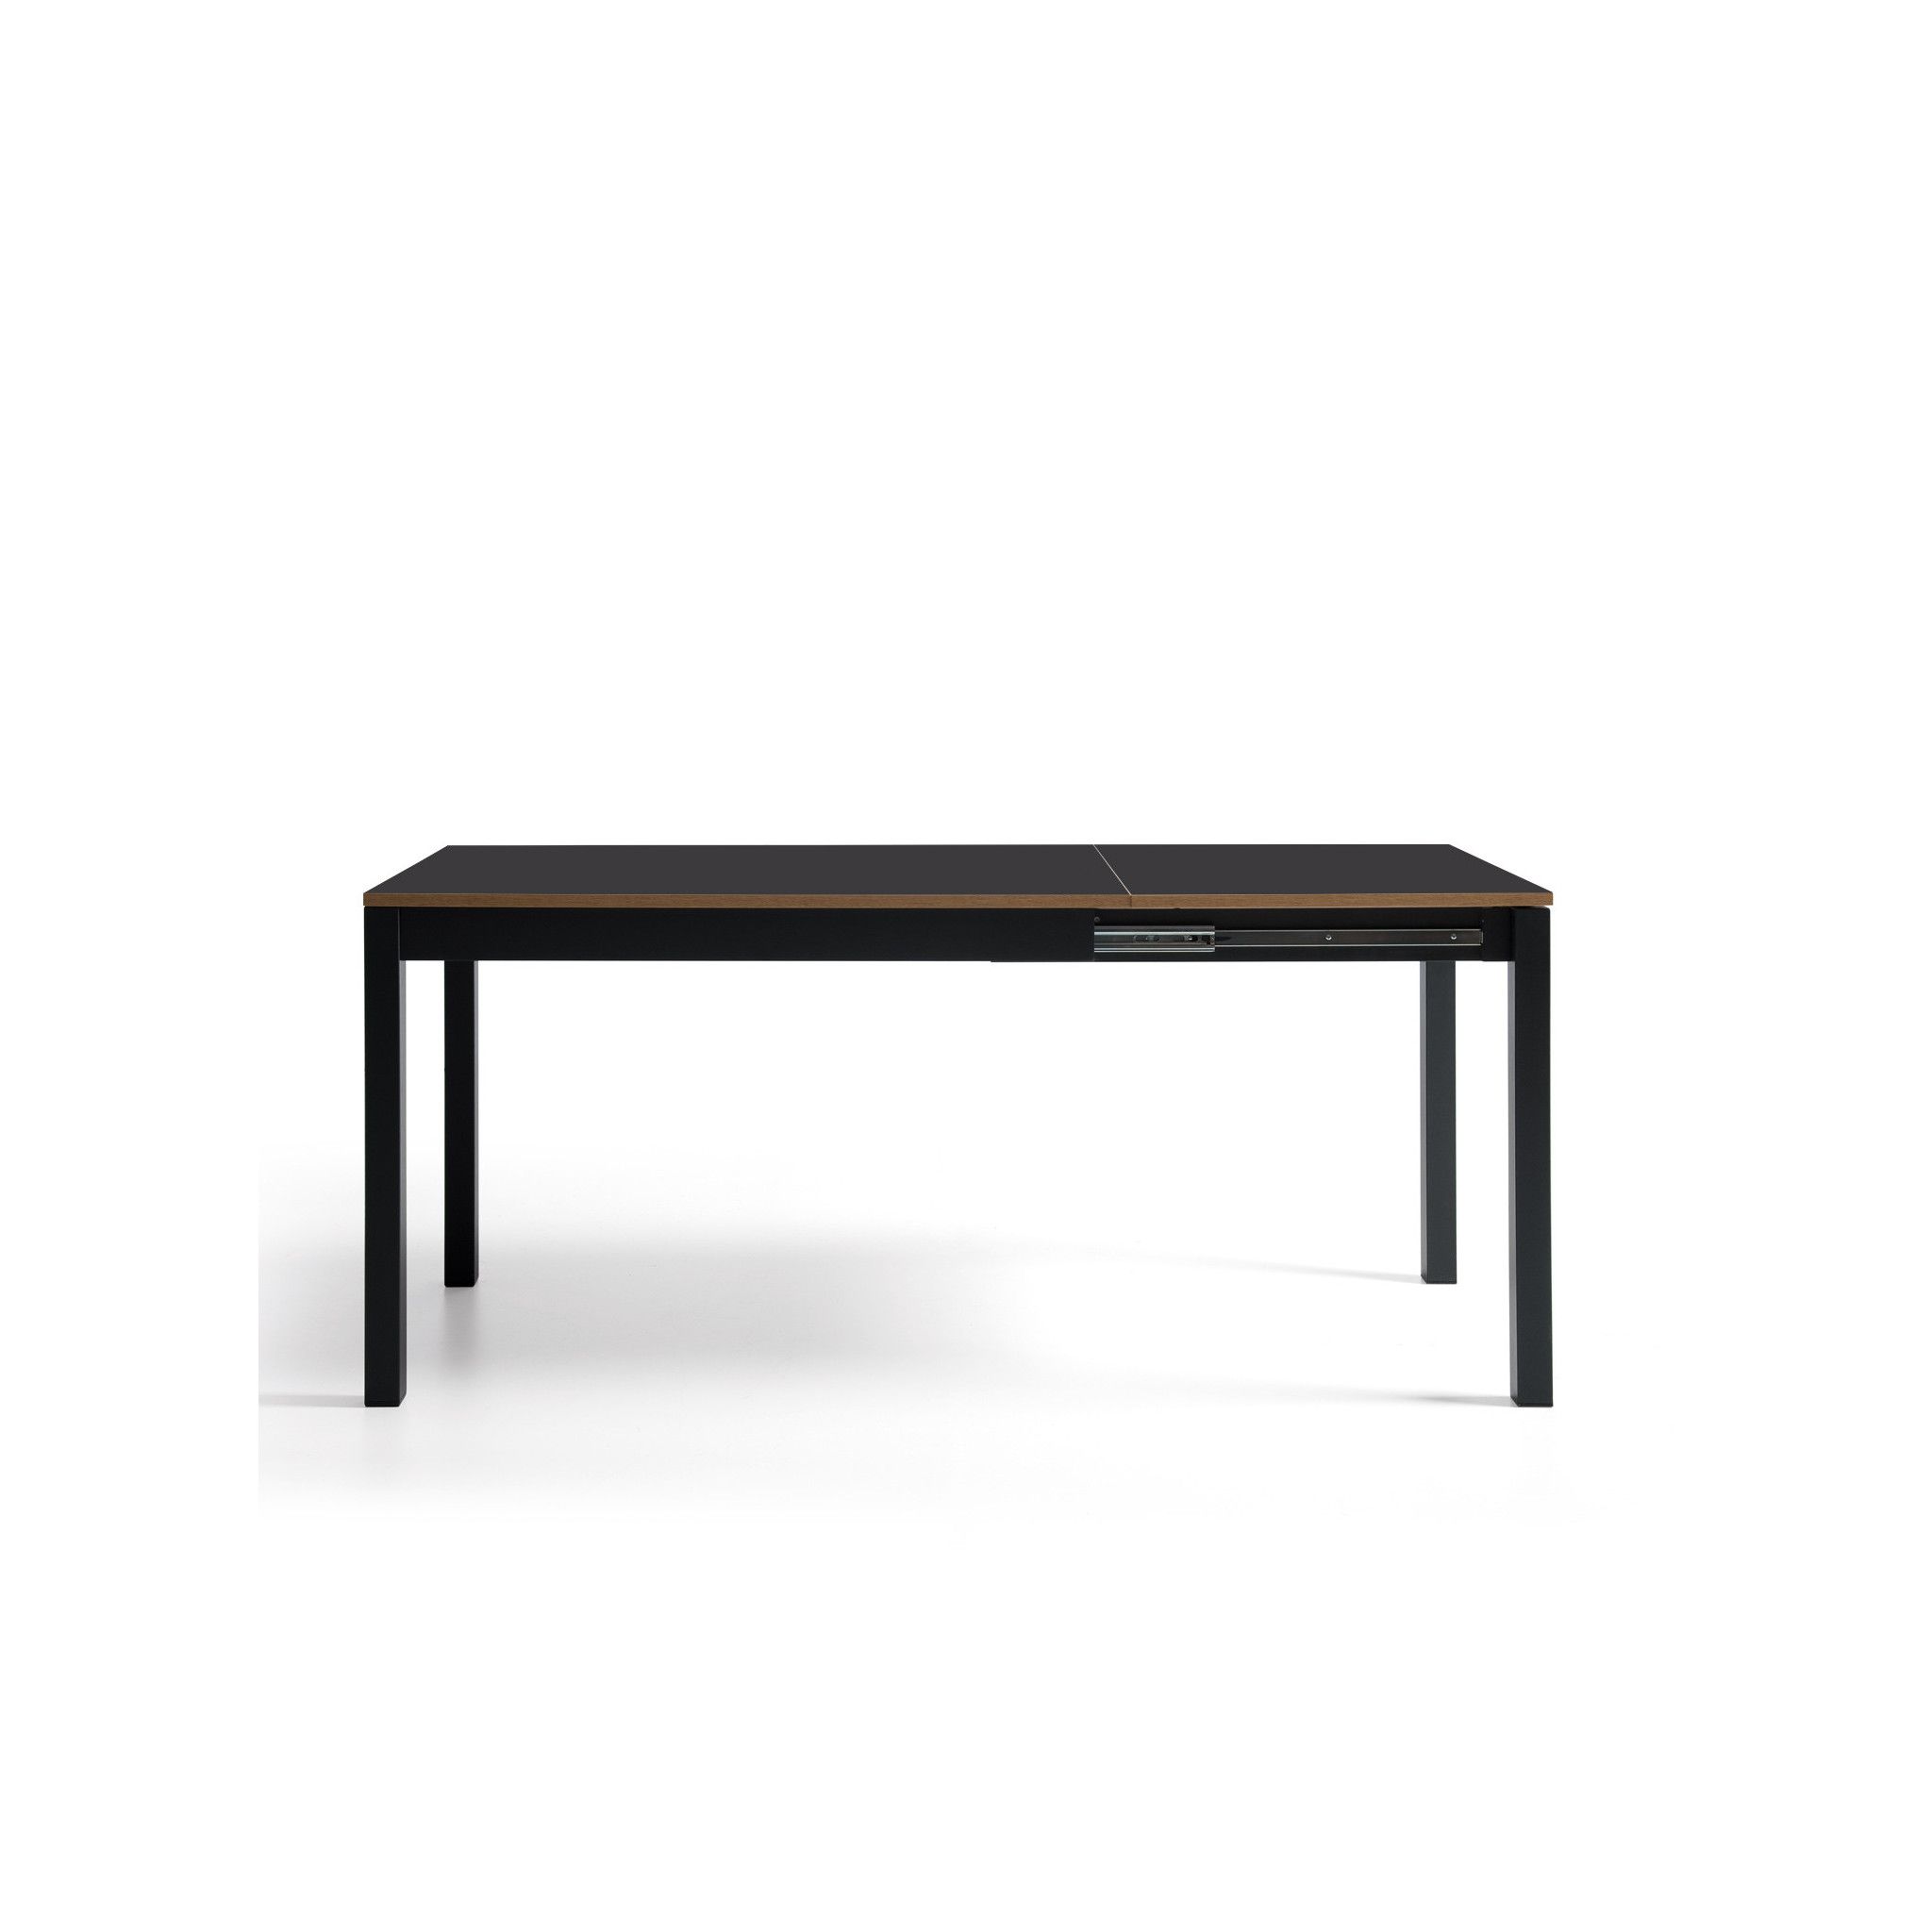 TABLE PALMA ANTHRACITE EXTENSIBLE